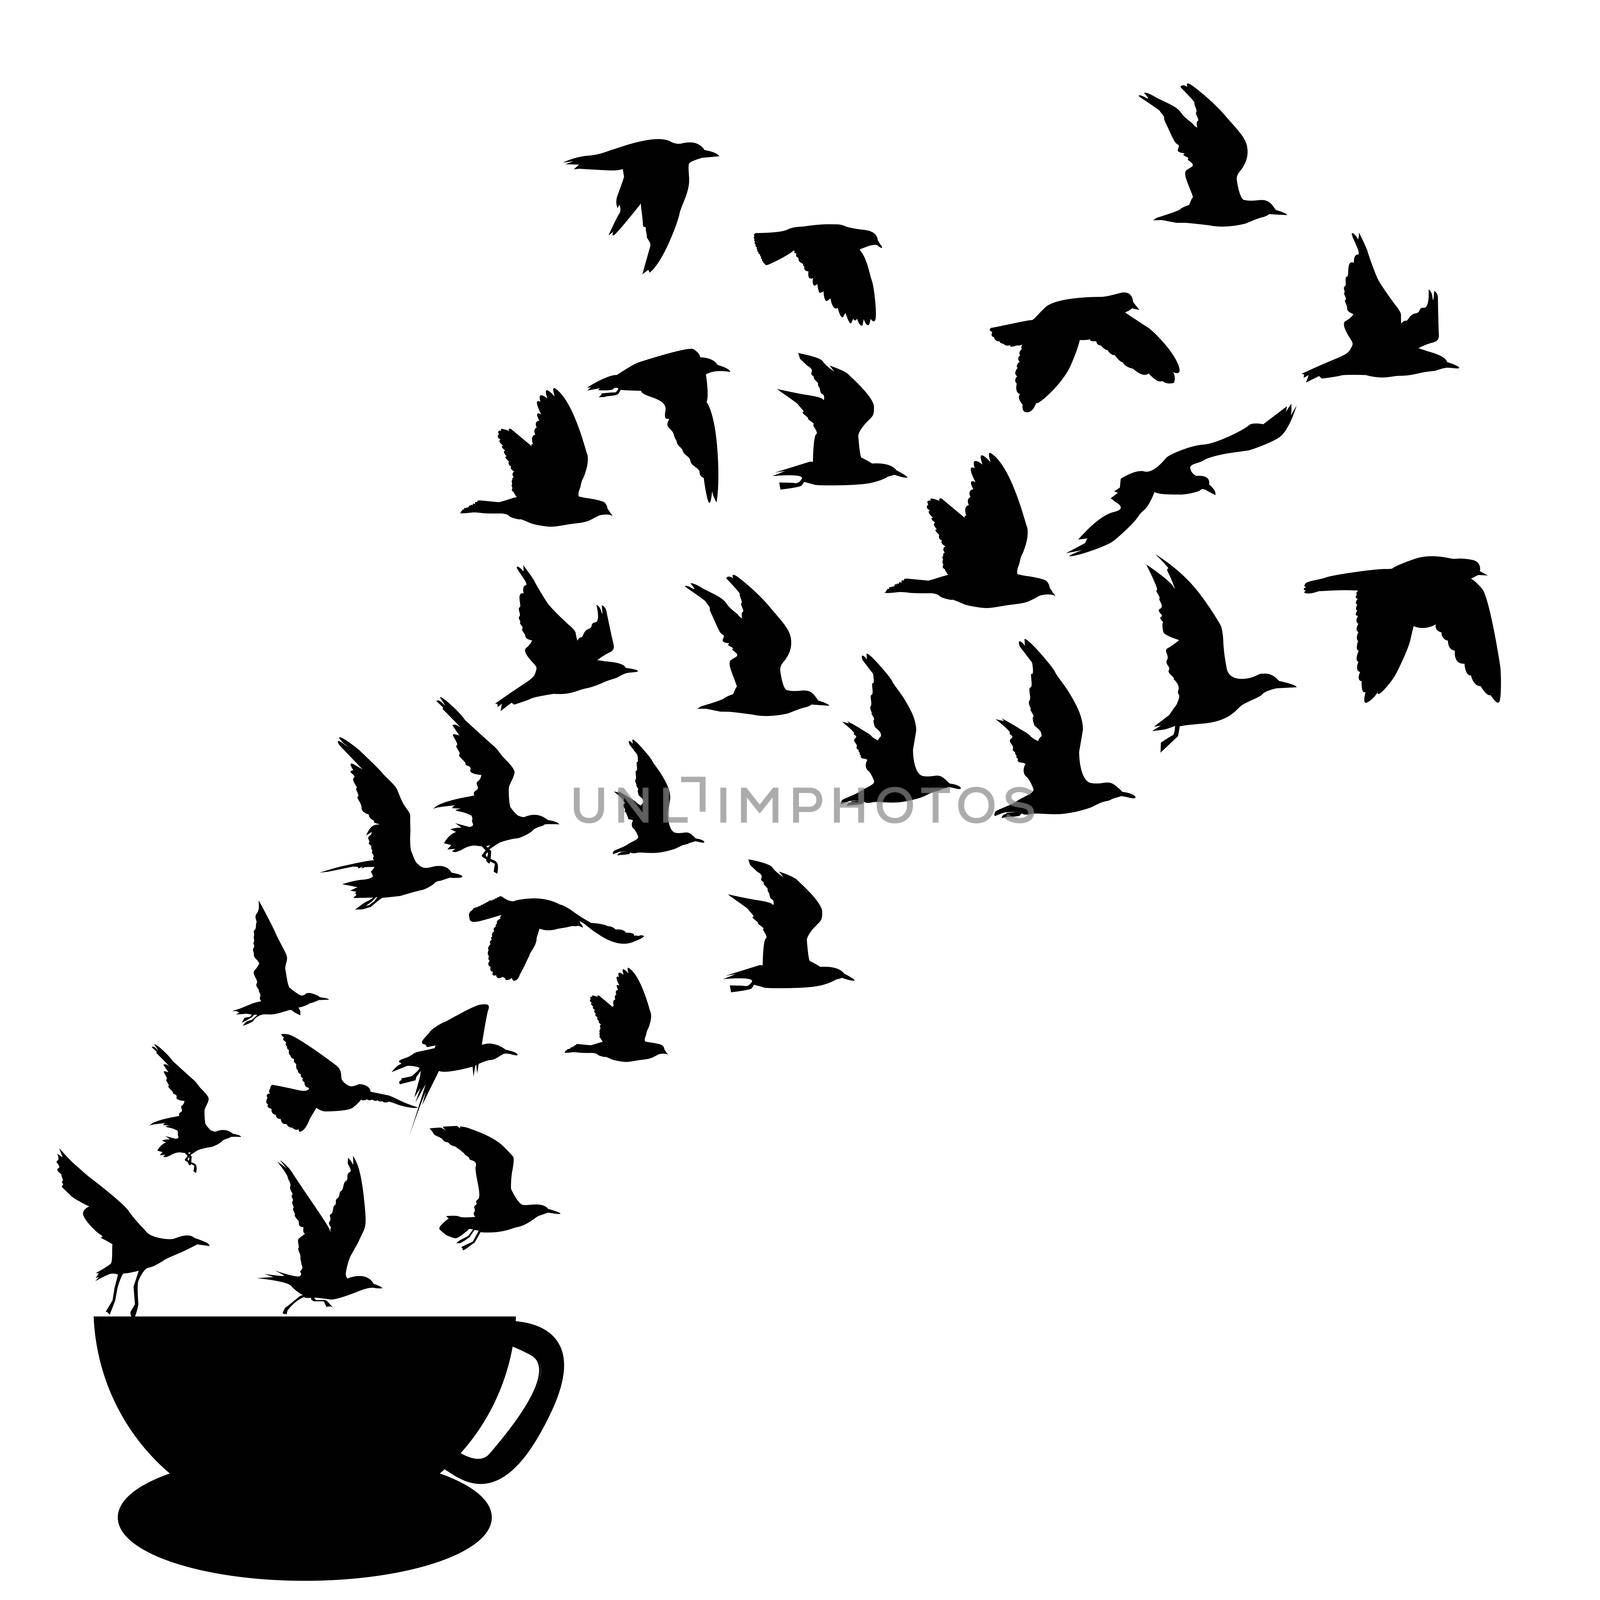 Silhouettes of birds flying from a cup of coffee